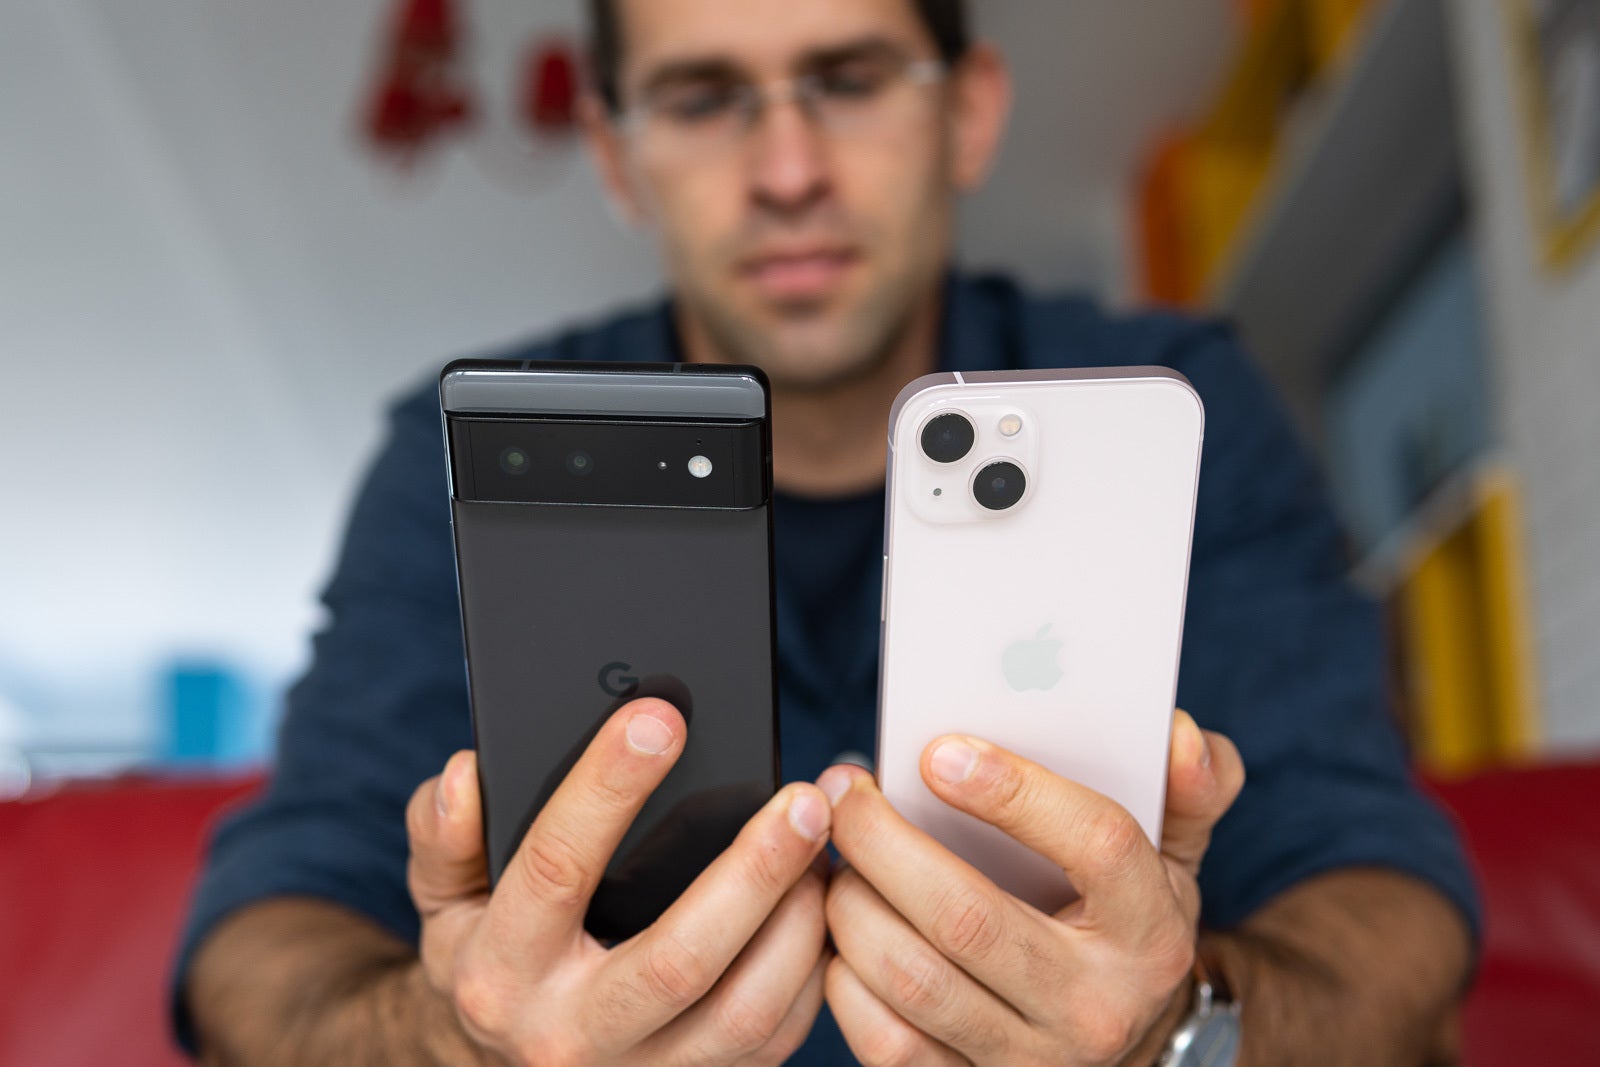 Pixel 6 features a dual rear camera in a distinct vertical bar that sticks out the back - Google Pixel 6 vs Apple iPhone 13